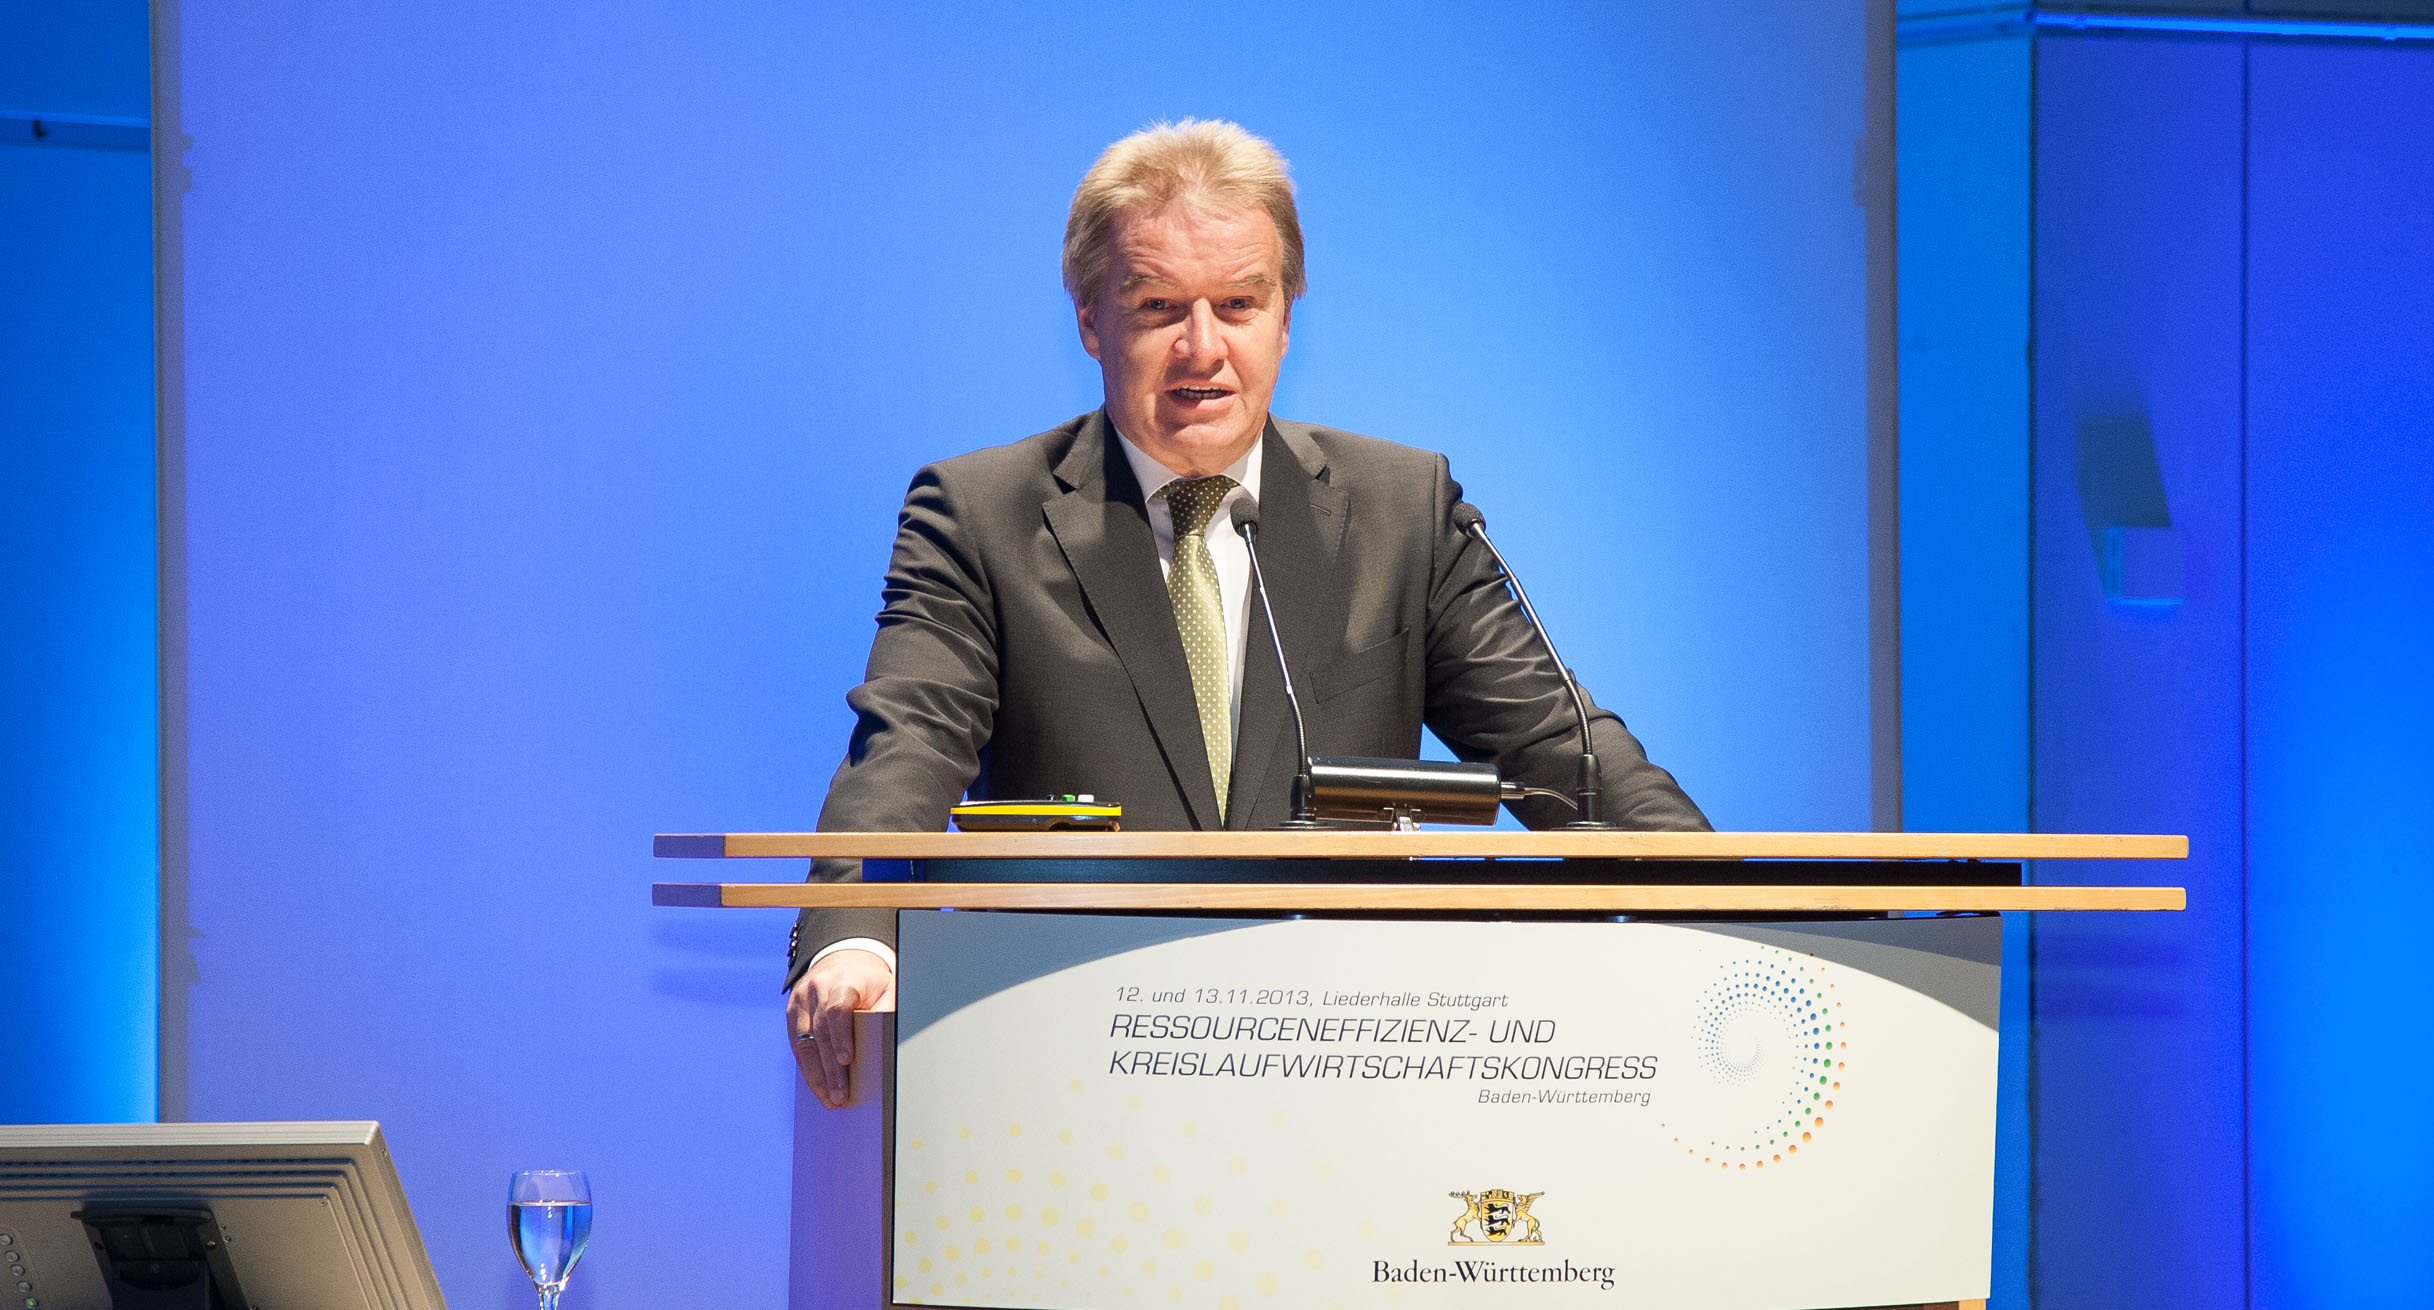 Minister of the Environment Franz Untersteller at the Resource Efficiency and Recycling Management Congress']